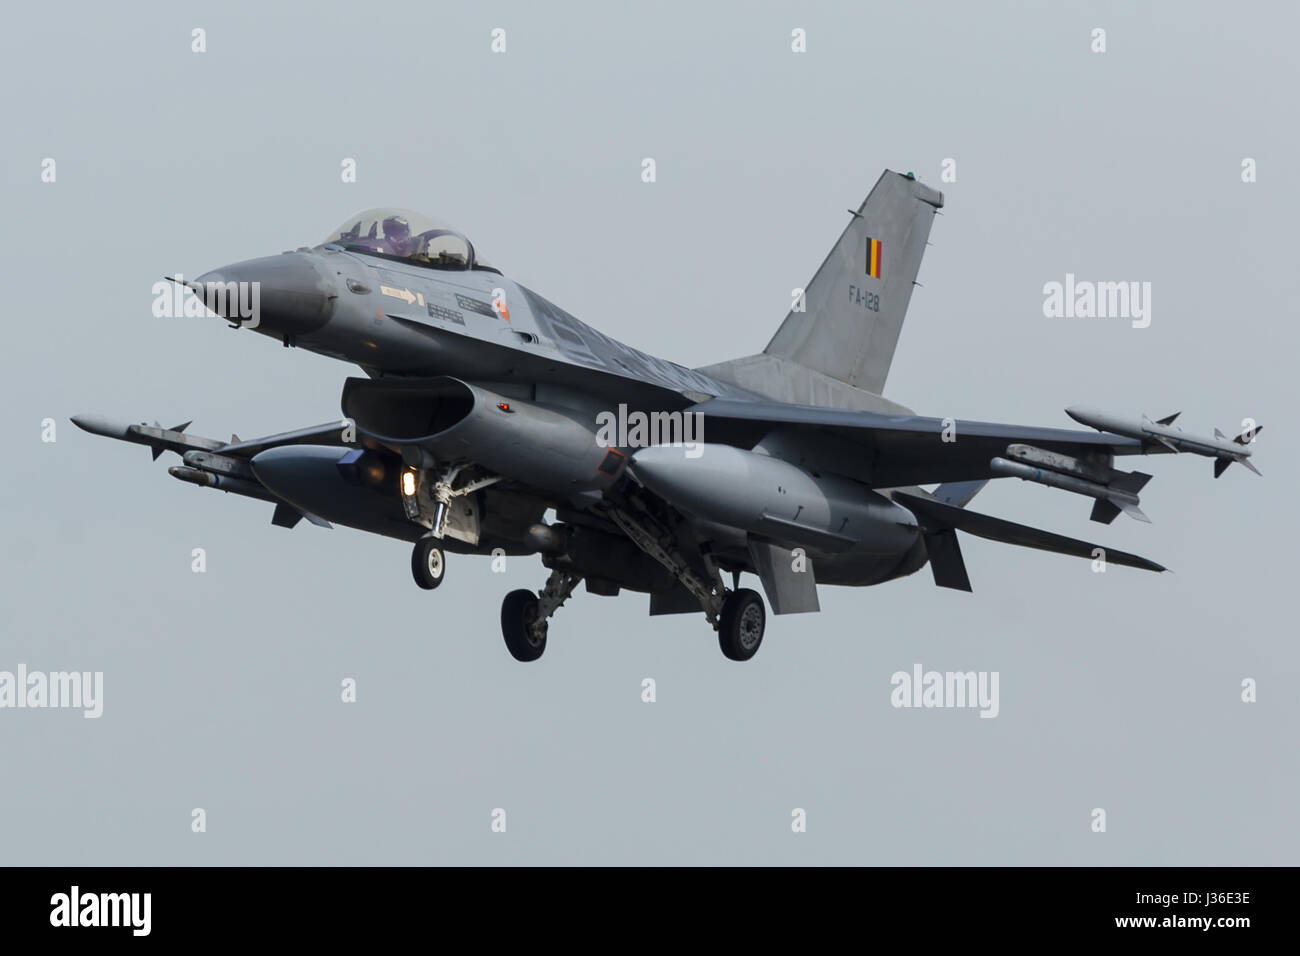 F-16A of 349 sqn of the Belgian Air Force during Frisian Flag exercise Stock Photo